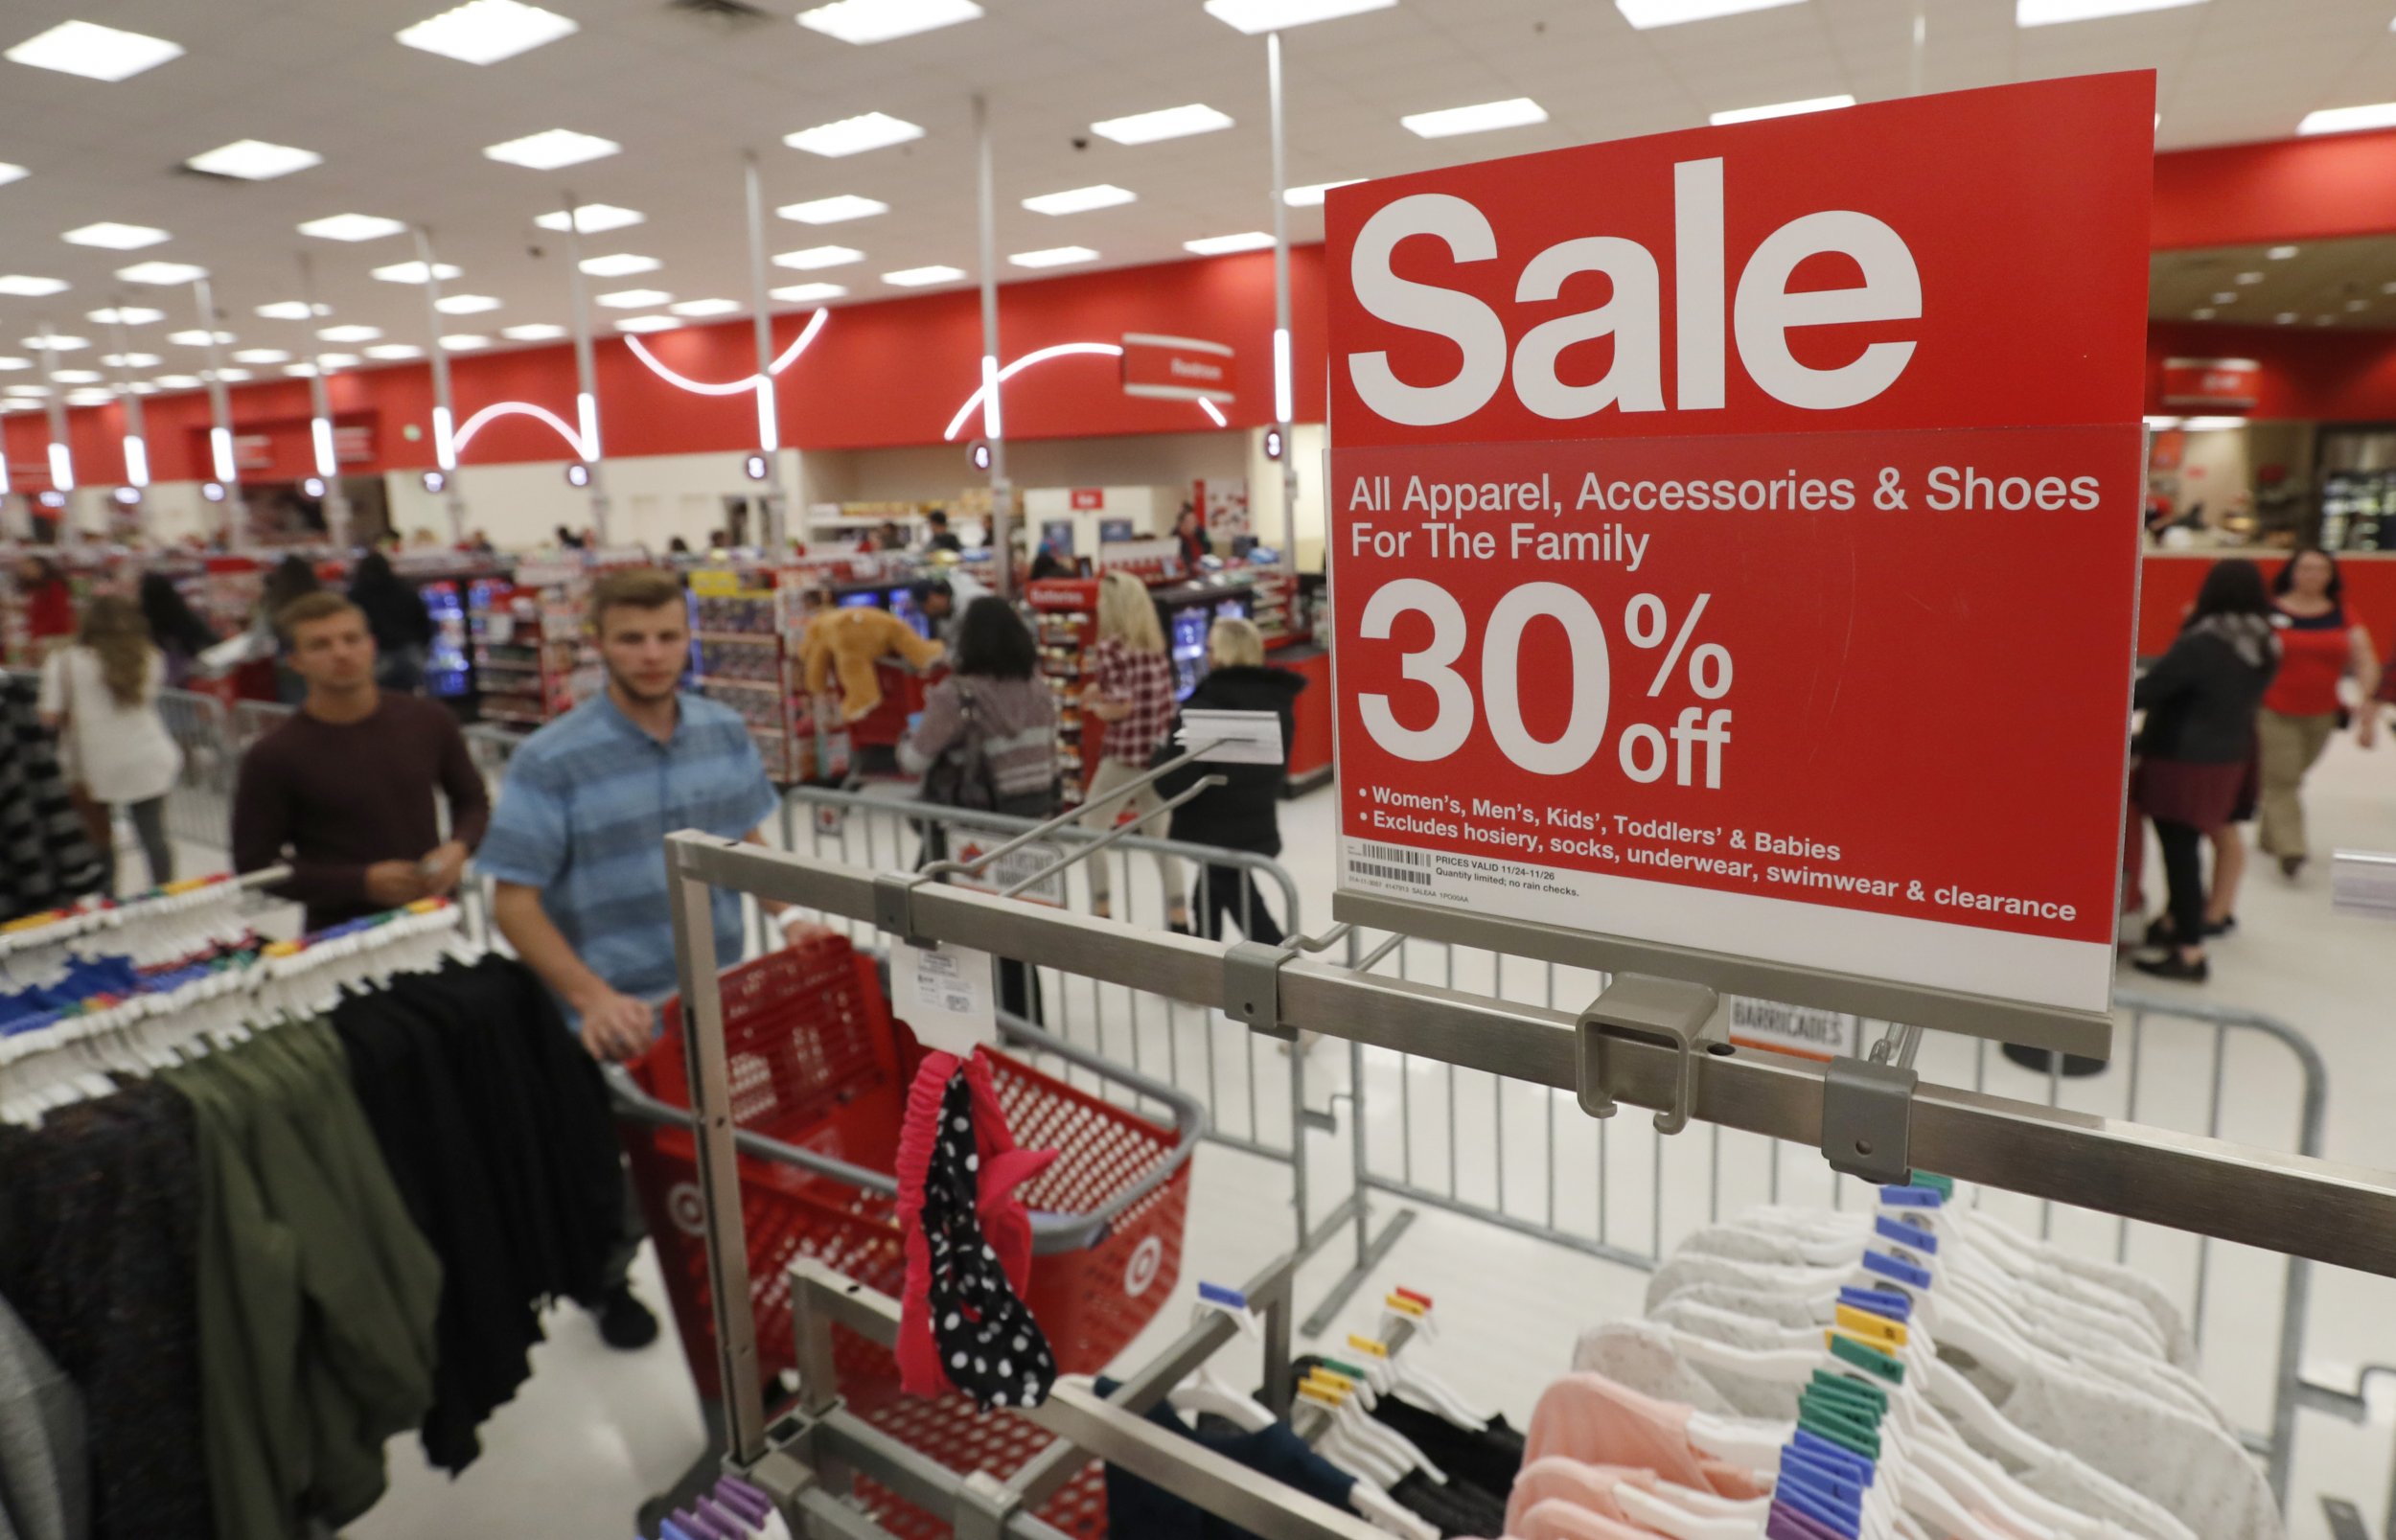 When Do Black Friday Ads Come Out? Target, Kohl's Already Released Flyers